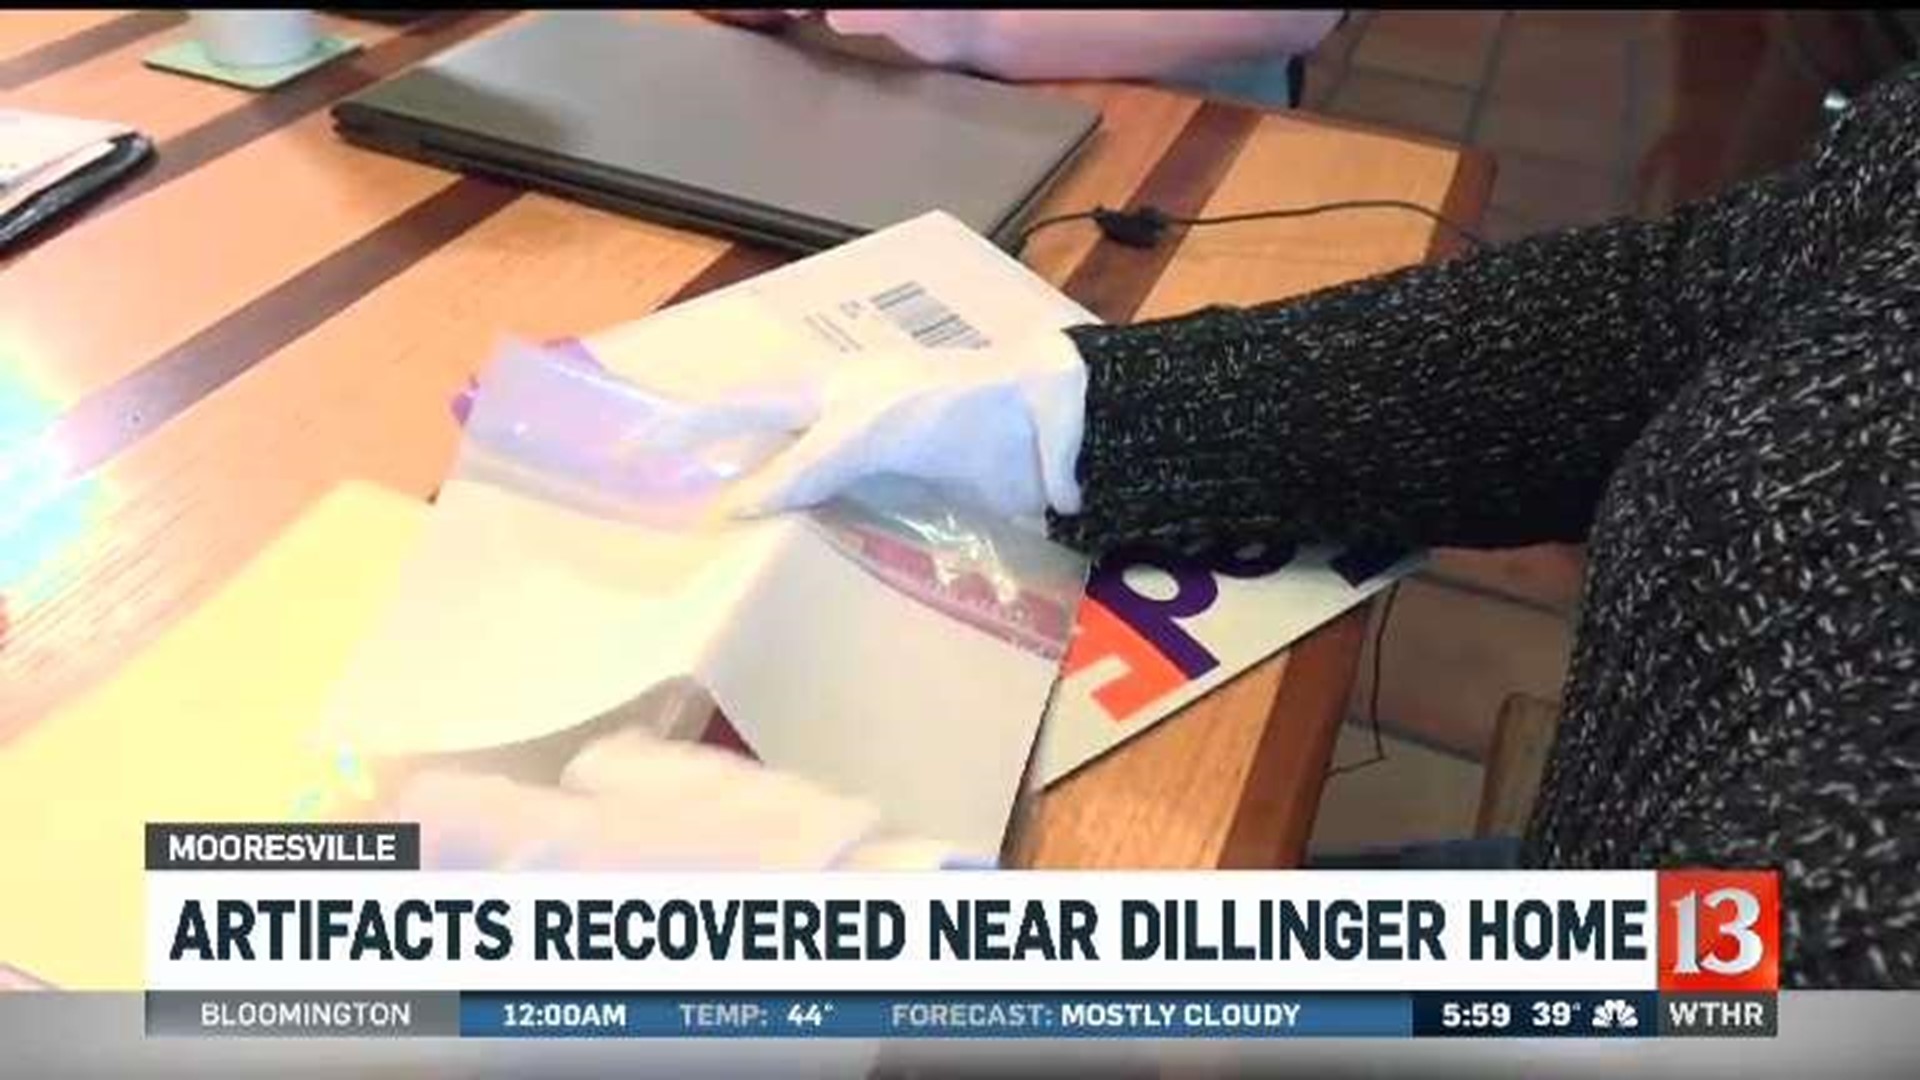 Artifacts recovered near Dillinger home